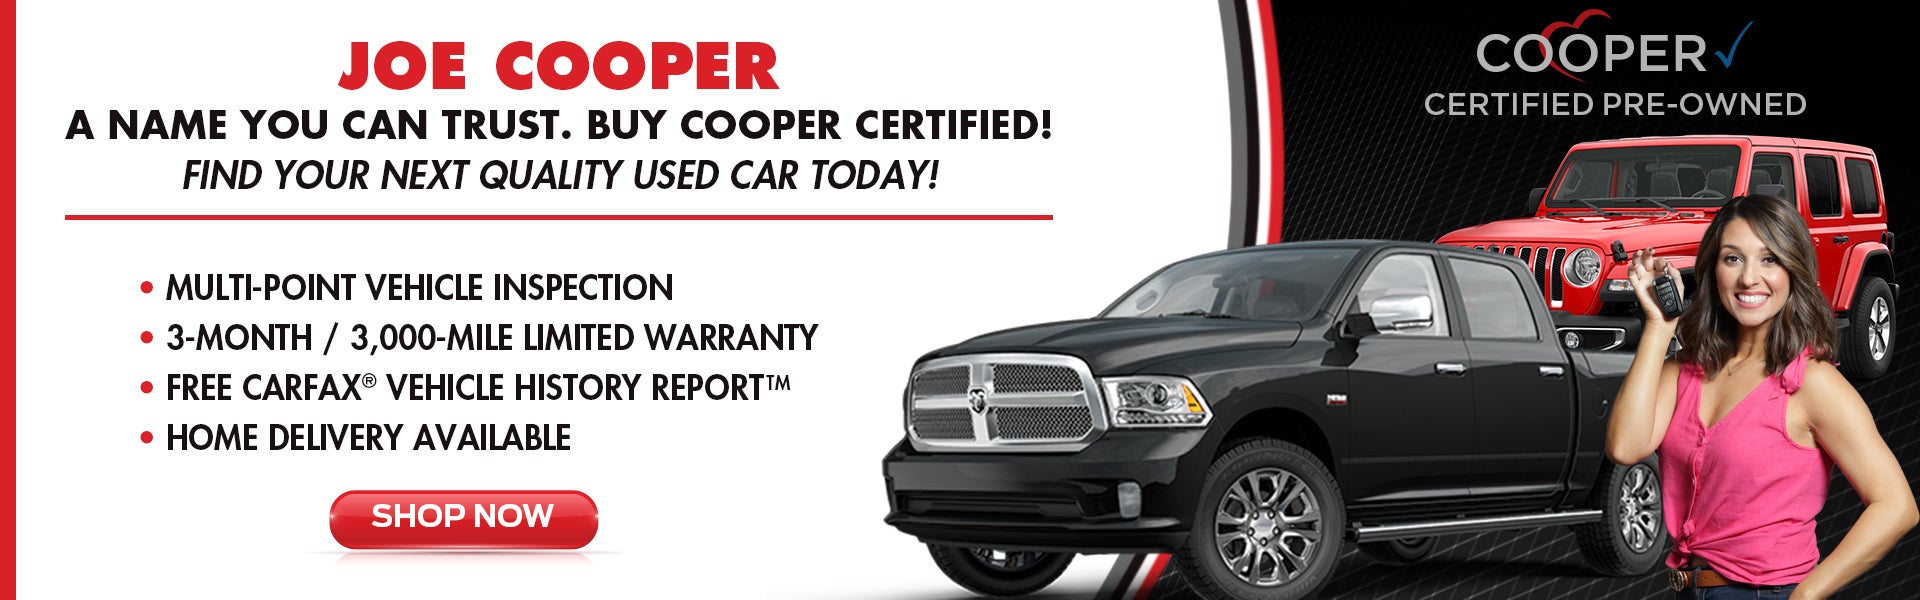 Cooper Certified Pre-owned 